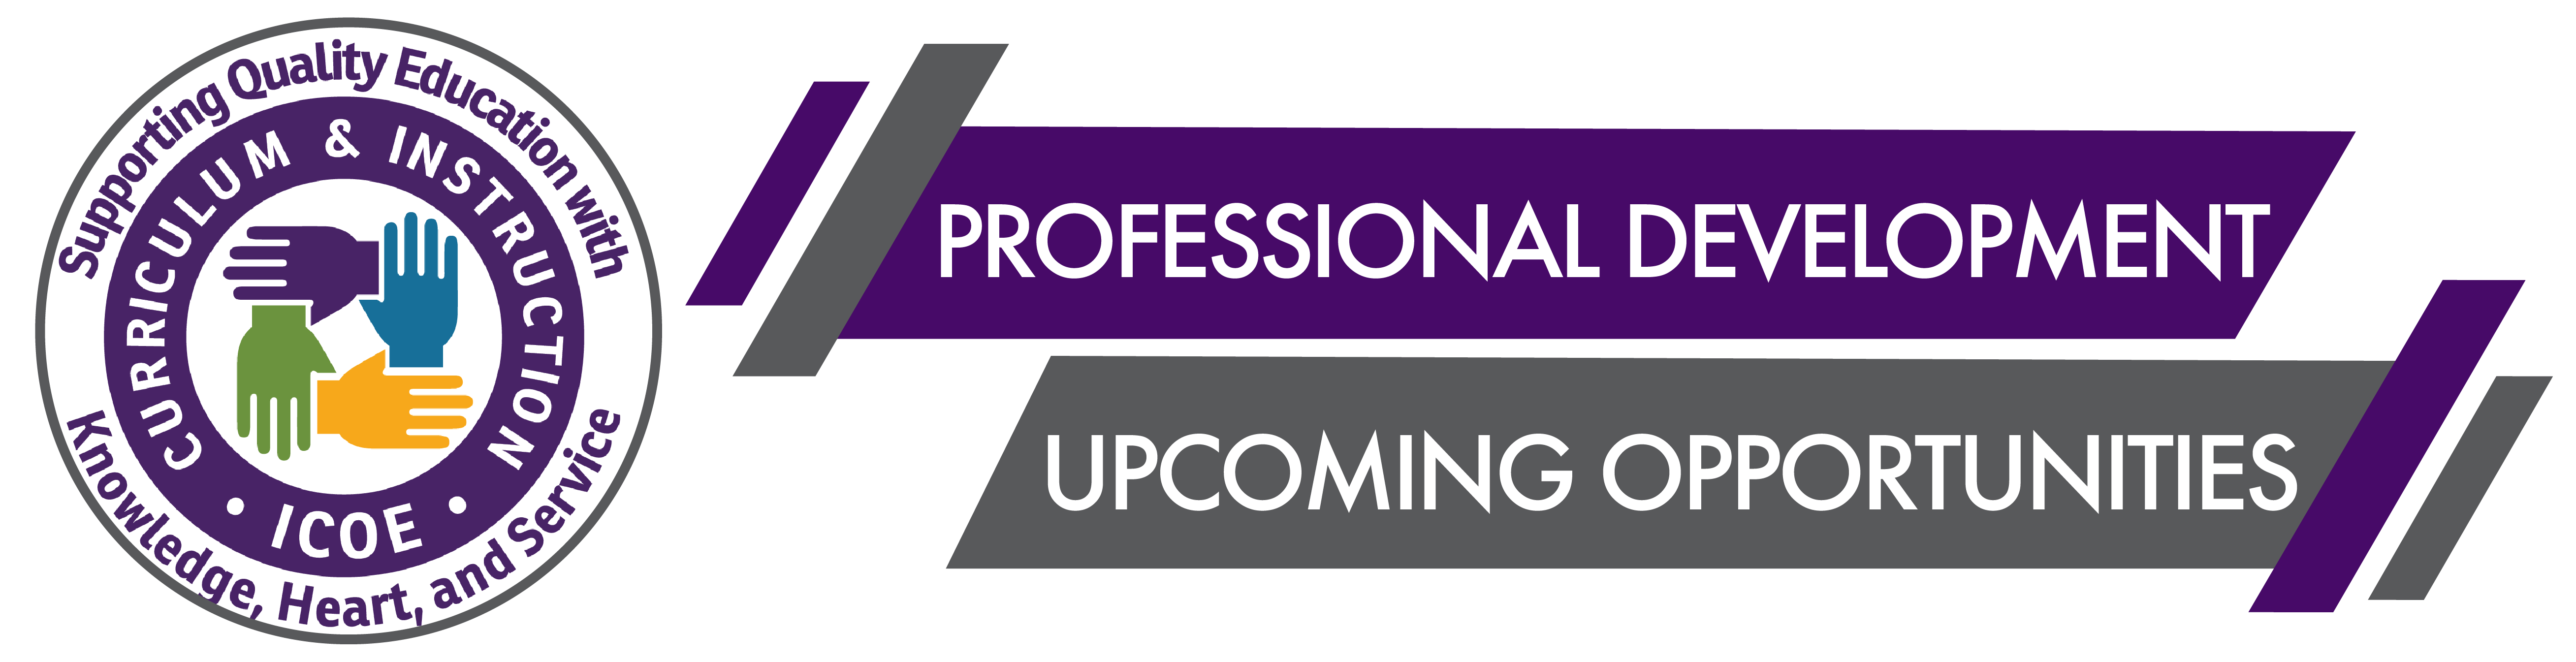 Professional Development Upcoming Opportunities Banner